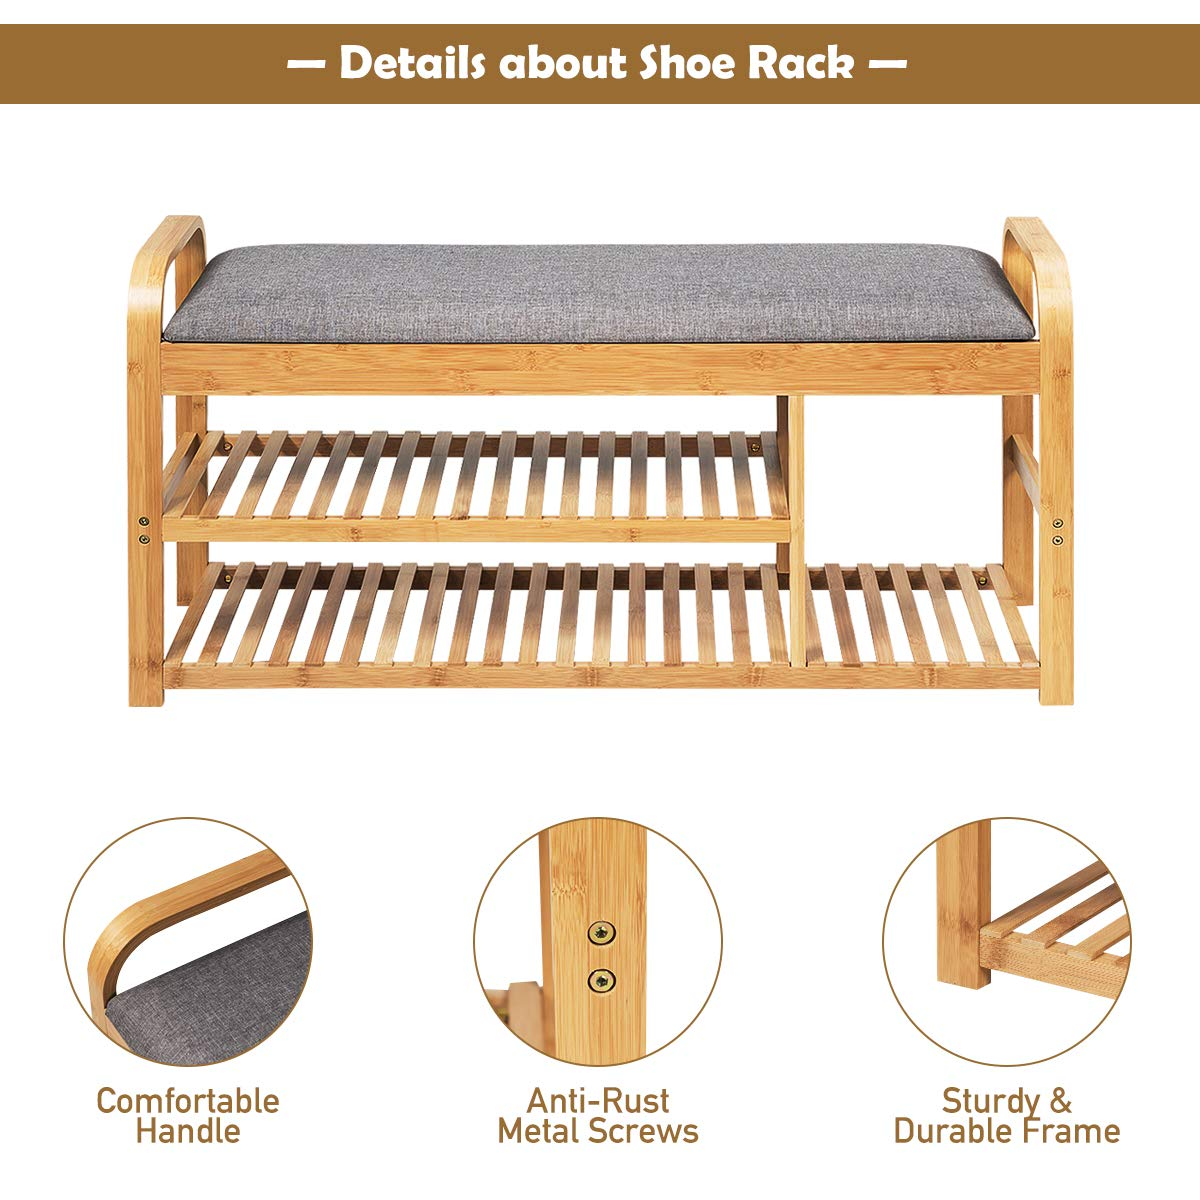 Giantex Shoe Rack Bench, Entryway 3-Tier Bamboo Shoe Organizer with Cushion (Natural and Grey)